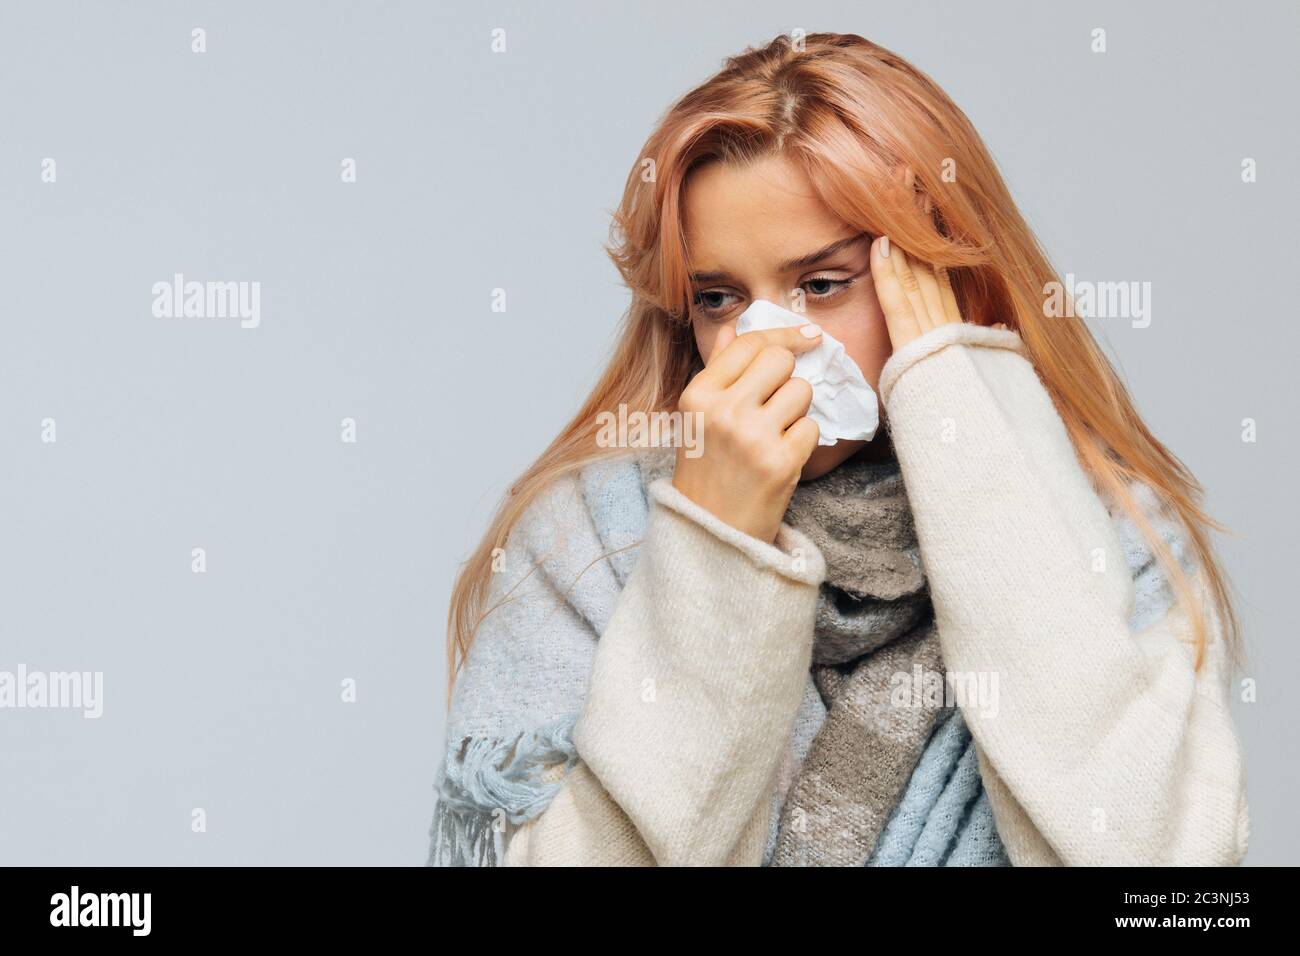 Attractive sick young woman with strawberry blonde hair wrapped in warm scarf with napkin blowing nose, feels bad, having headache, touching her foreh Stock Photo